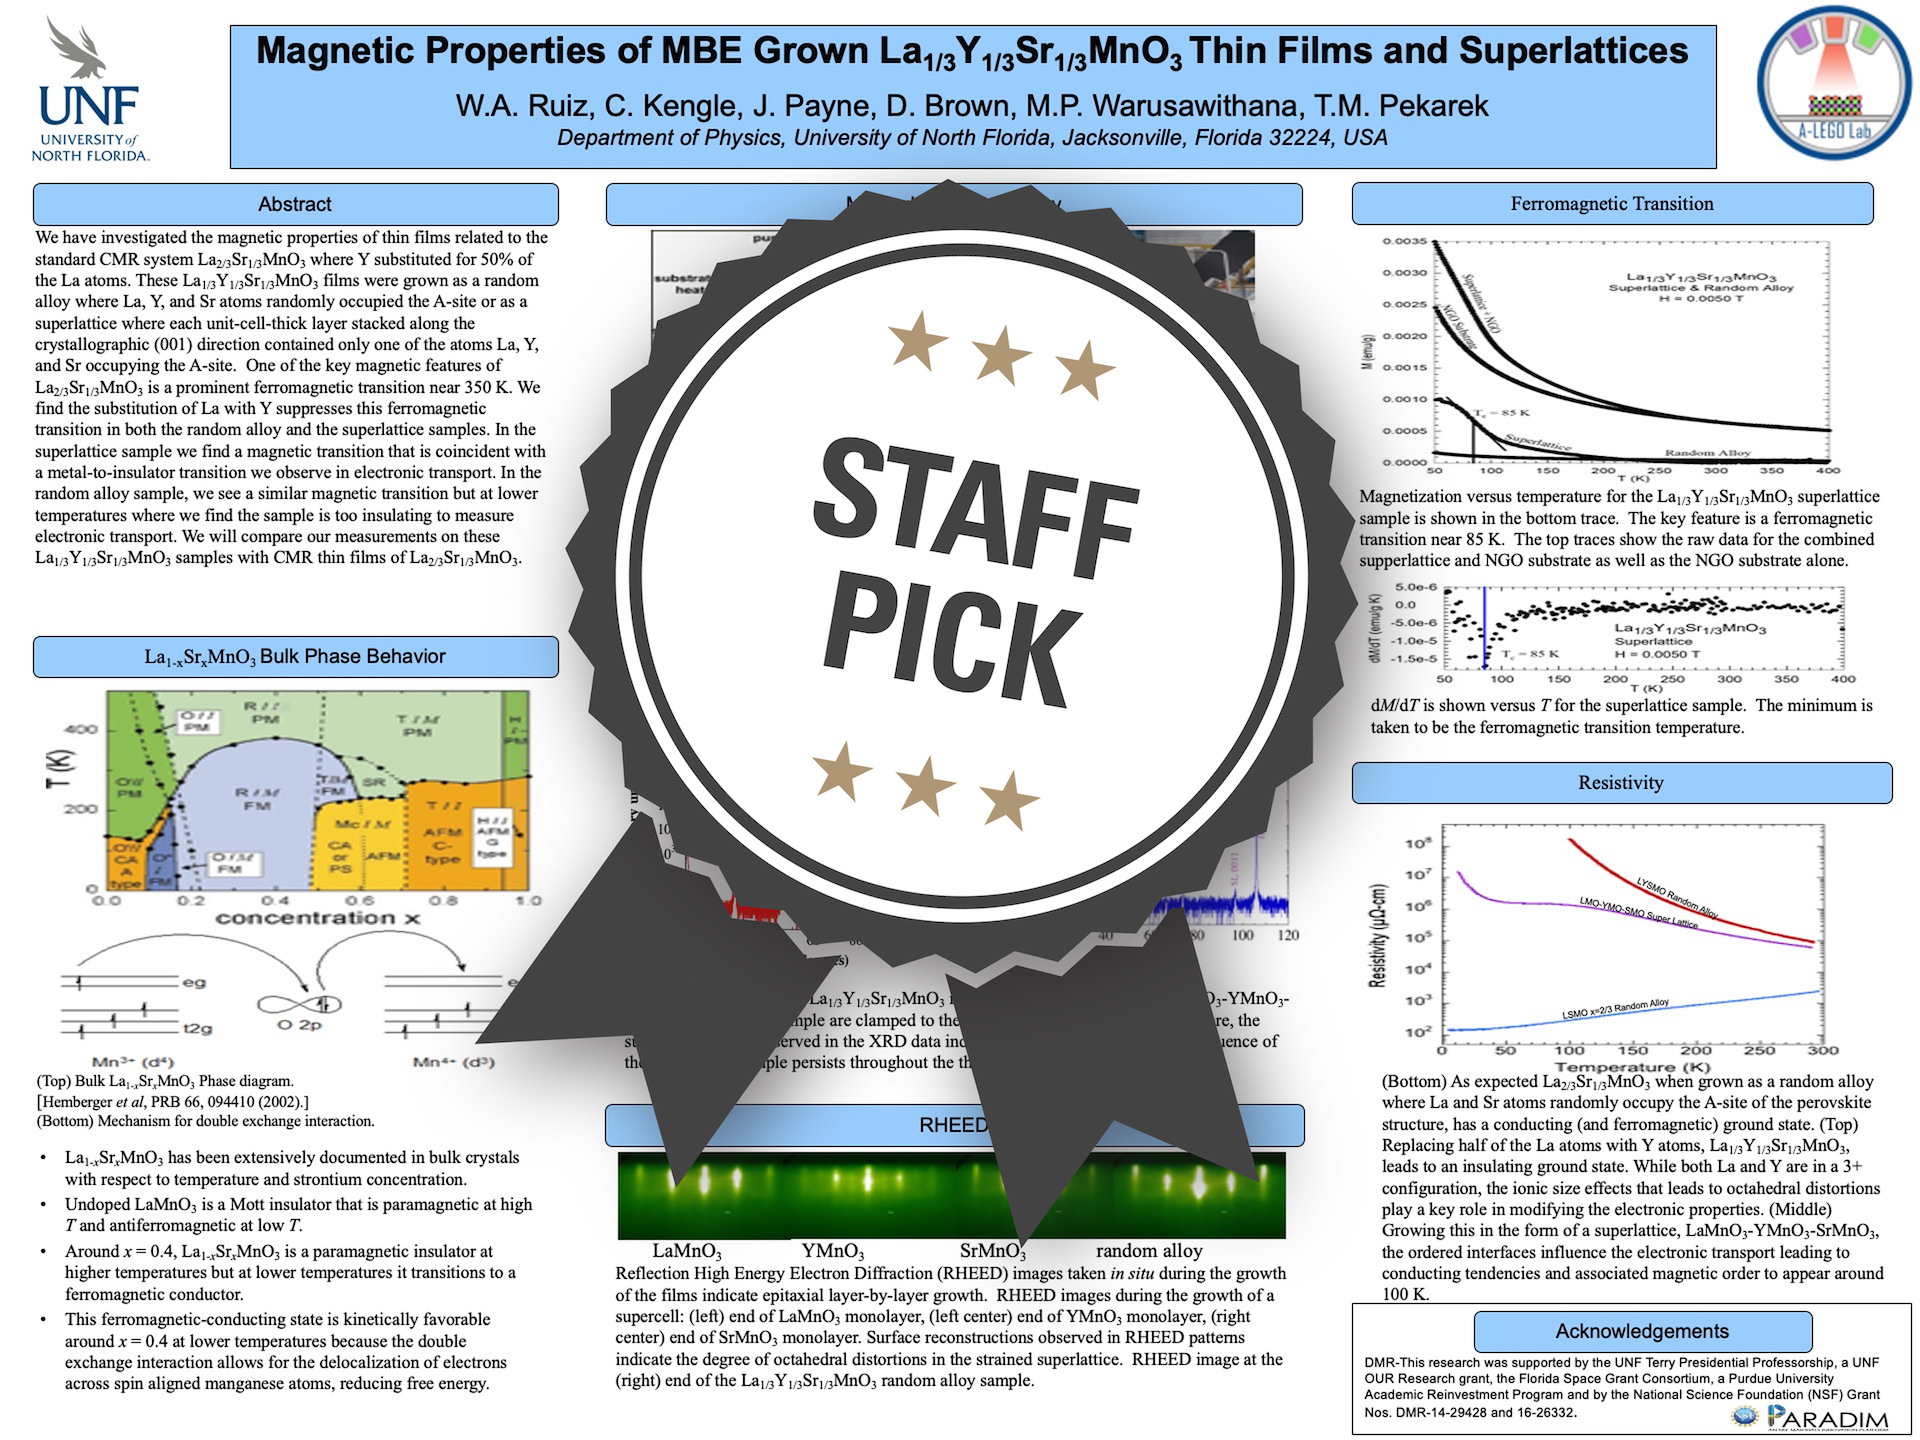 Magnetic Properties of MBE Grown La1/3Y1/3Sr1/3MnO3 Thin Films and Superlattices poster